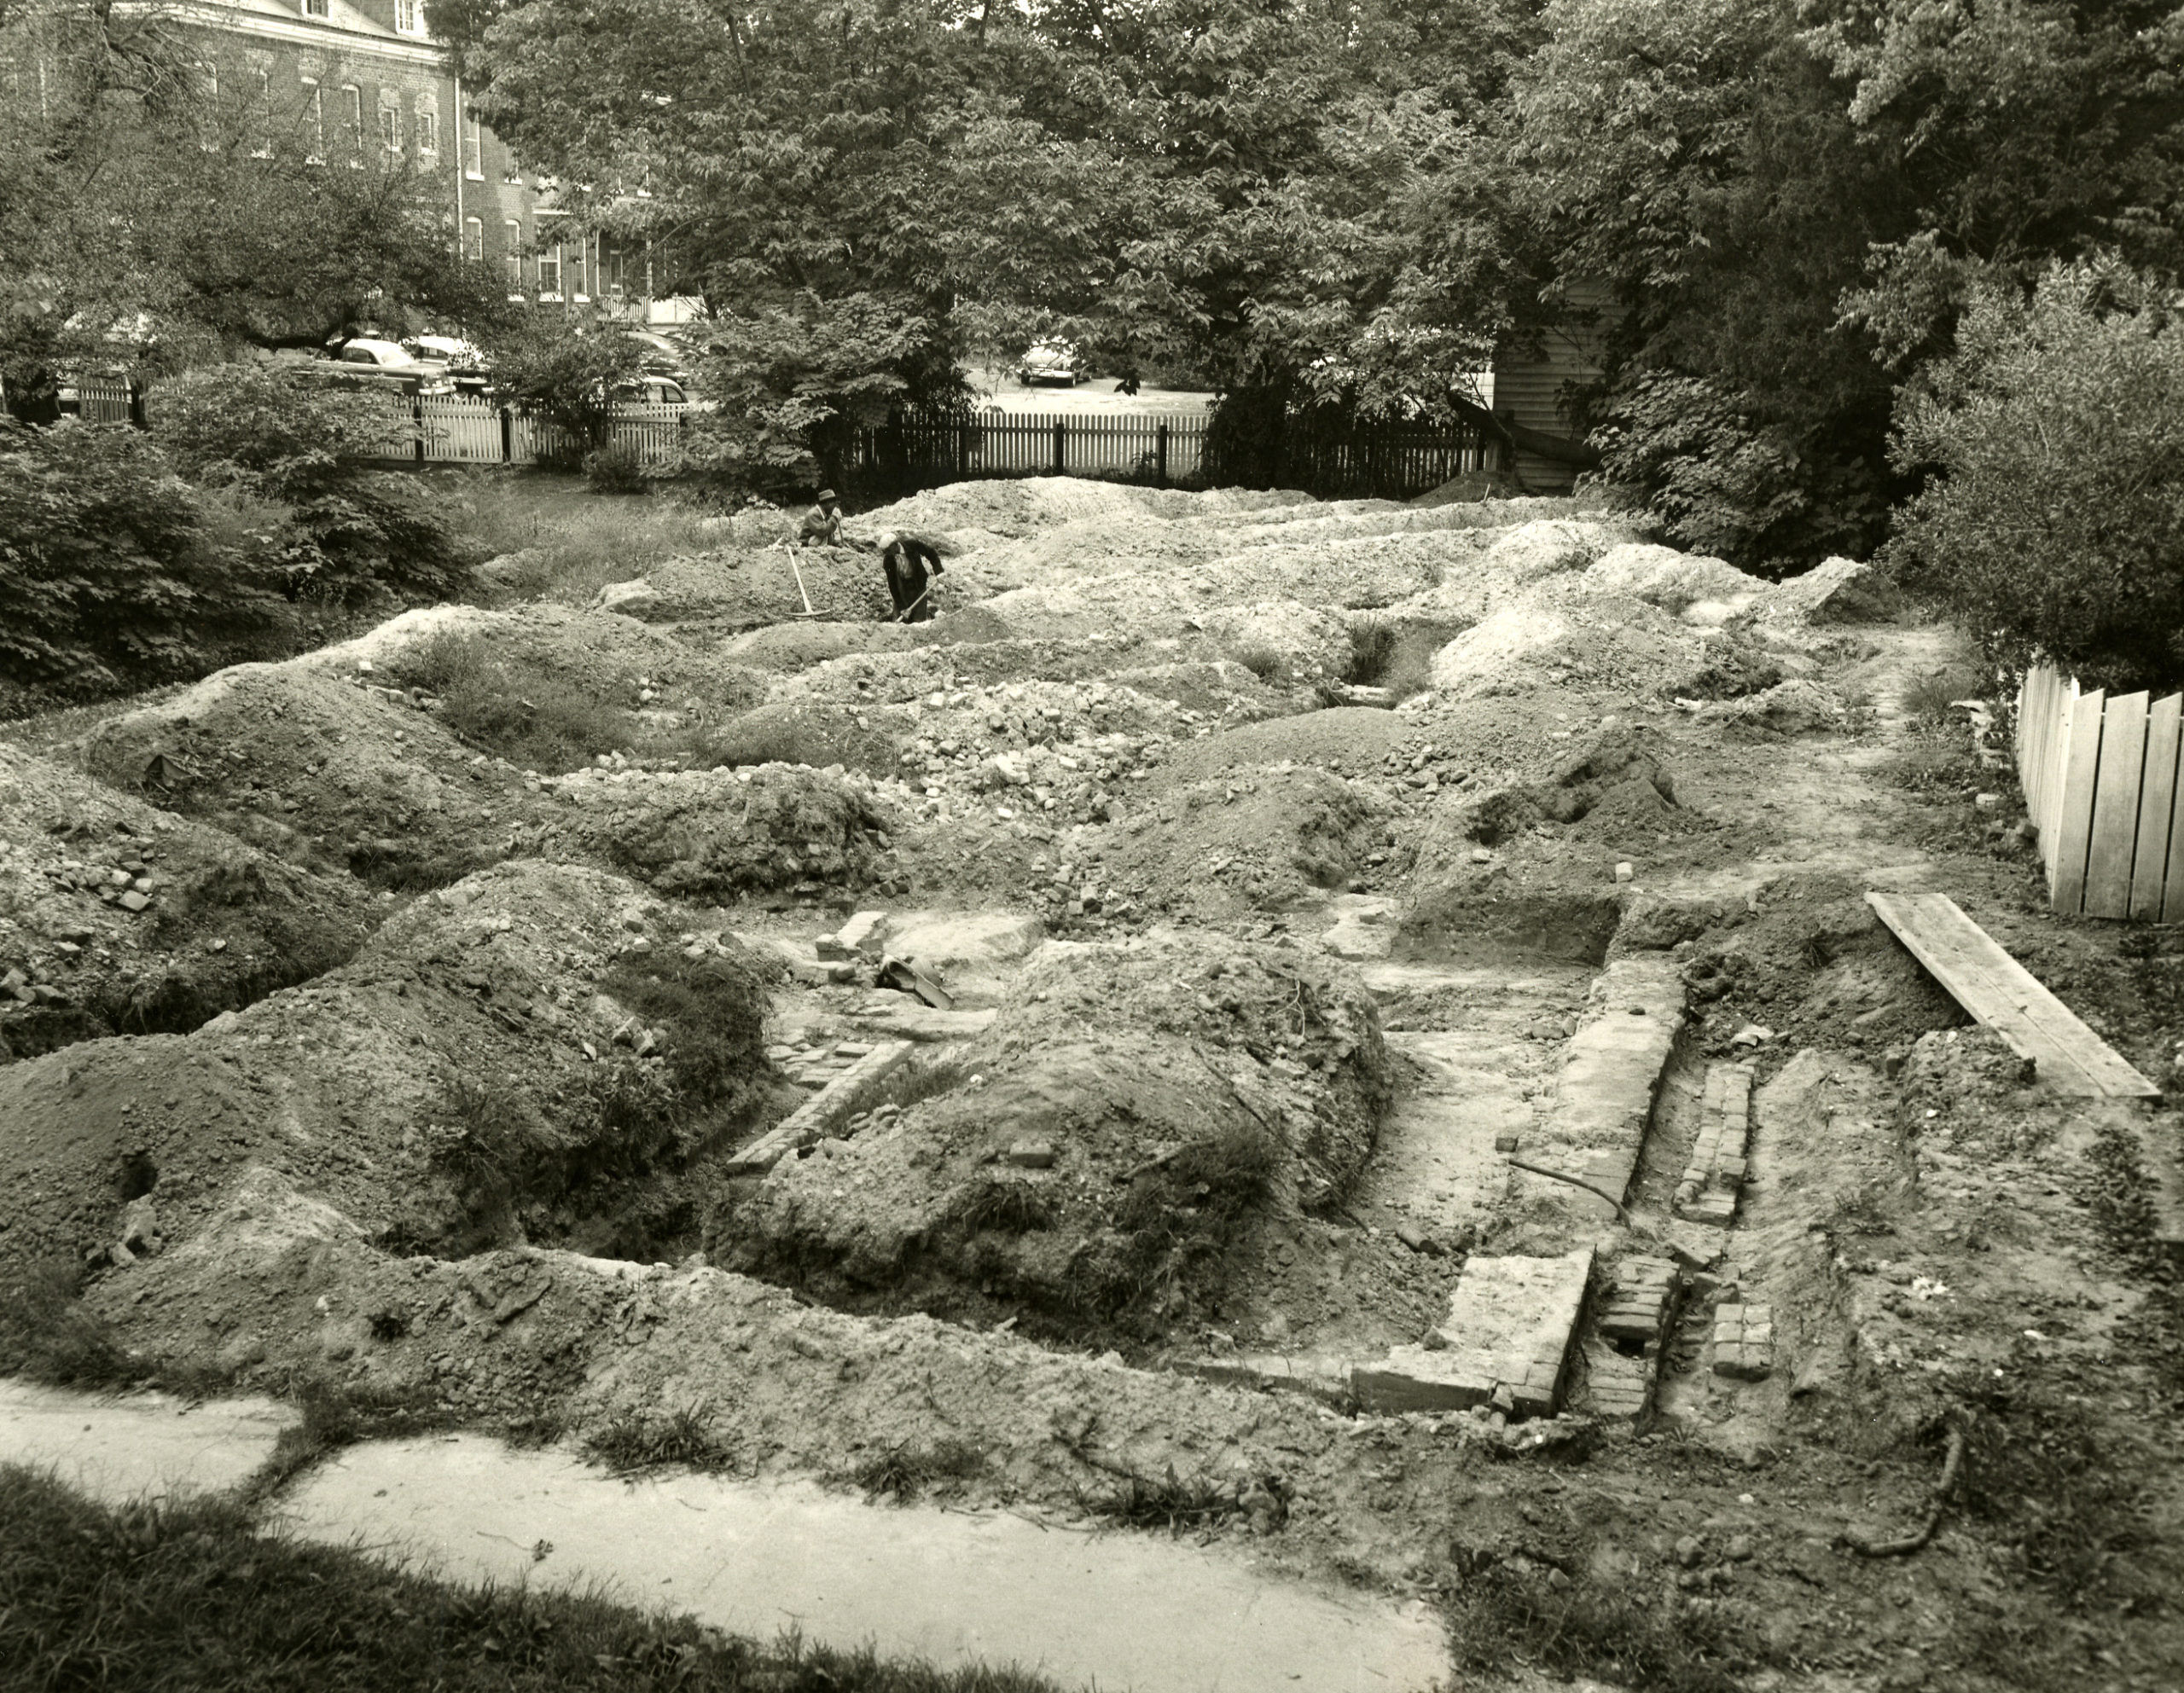 The site was originally excavated in the 1950s, but is now being revisited. (Photo: Colonial Williamsburg)